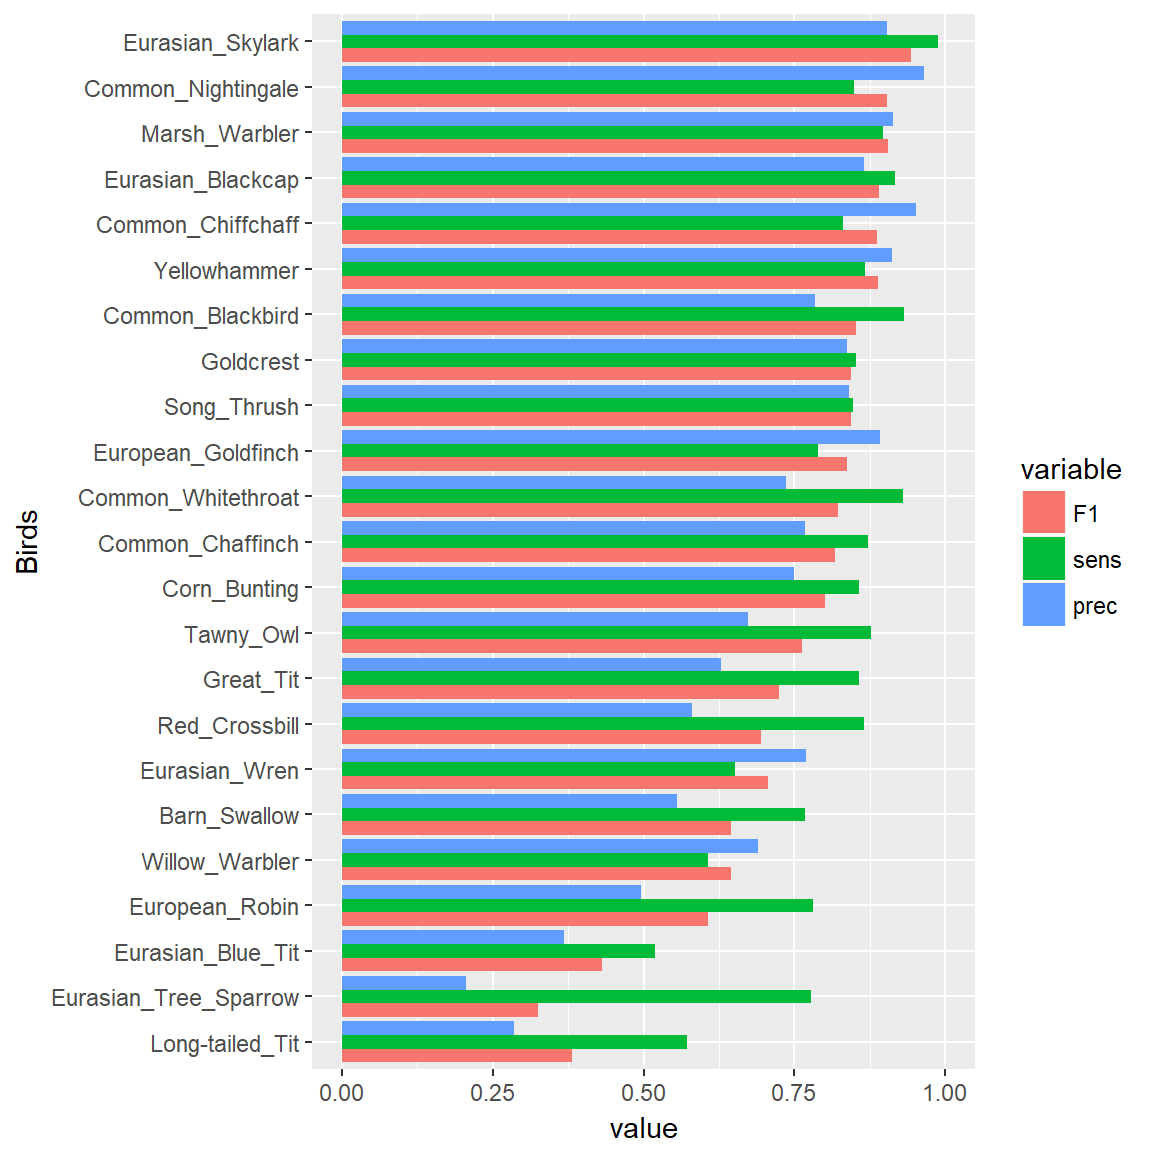 B1 model quality evaluation (combined)